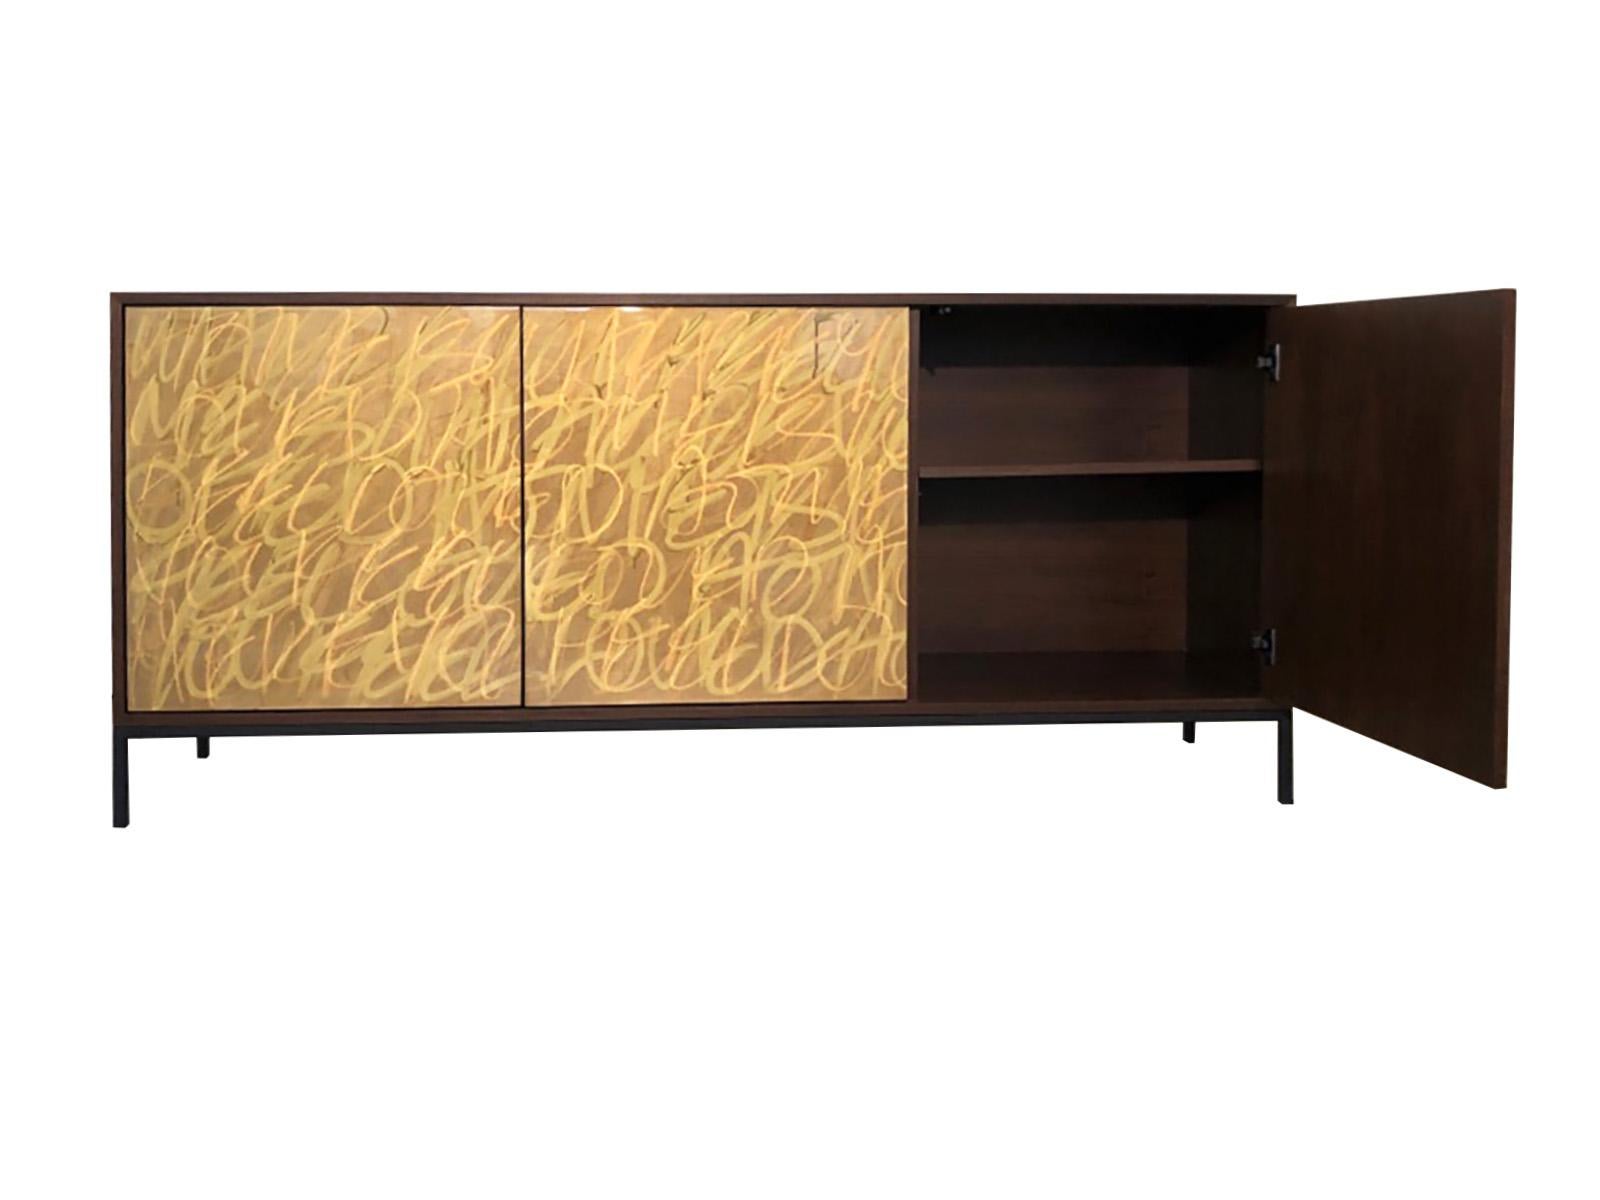 Stained Gold Graffiti Sideboard, Art Door Cabinet, Custom Hand Painted For Sale